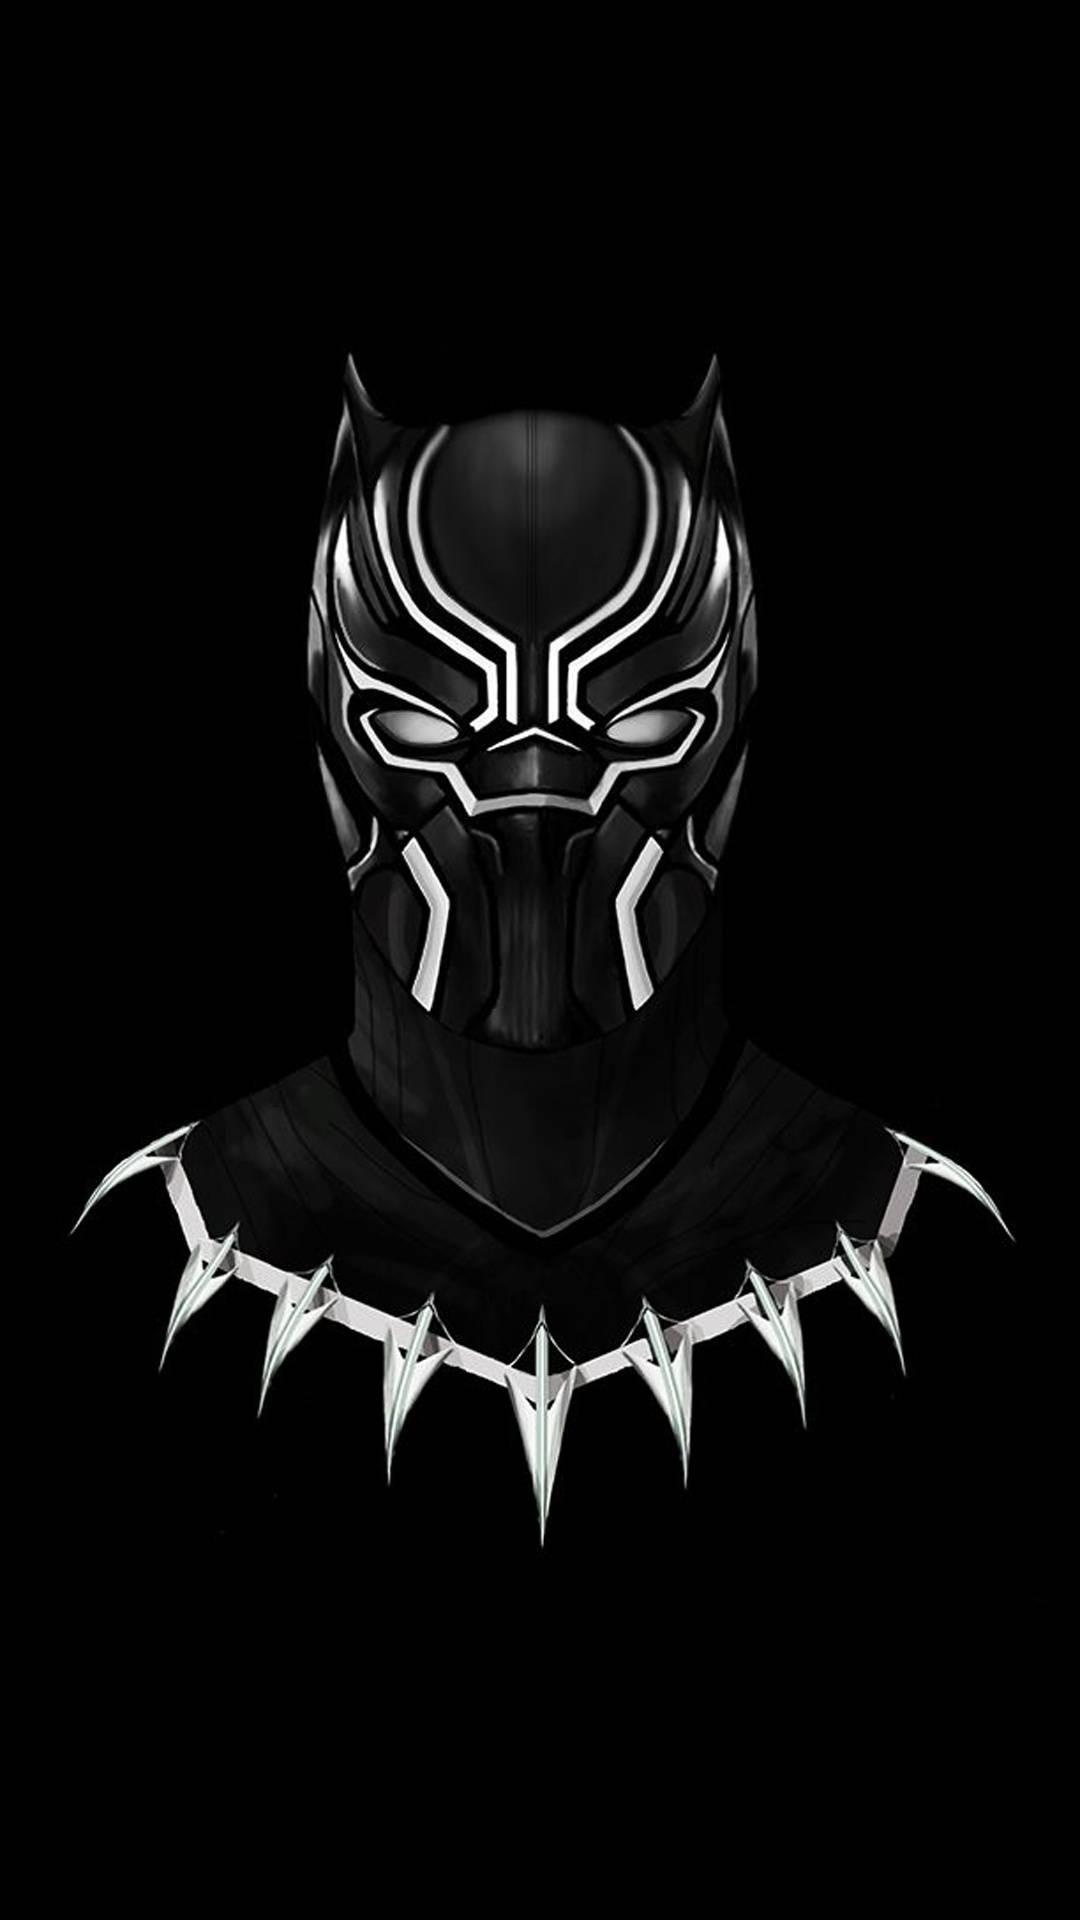 Great Electronics Cases: #Mobile #Wallpaper - #Black panther